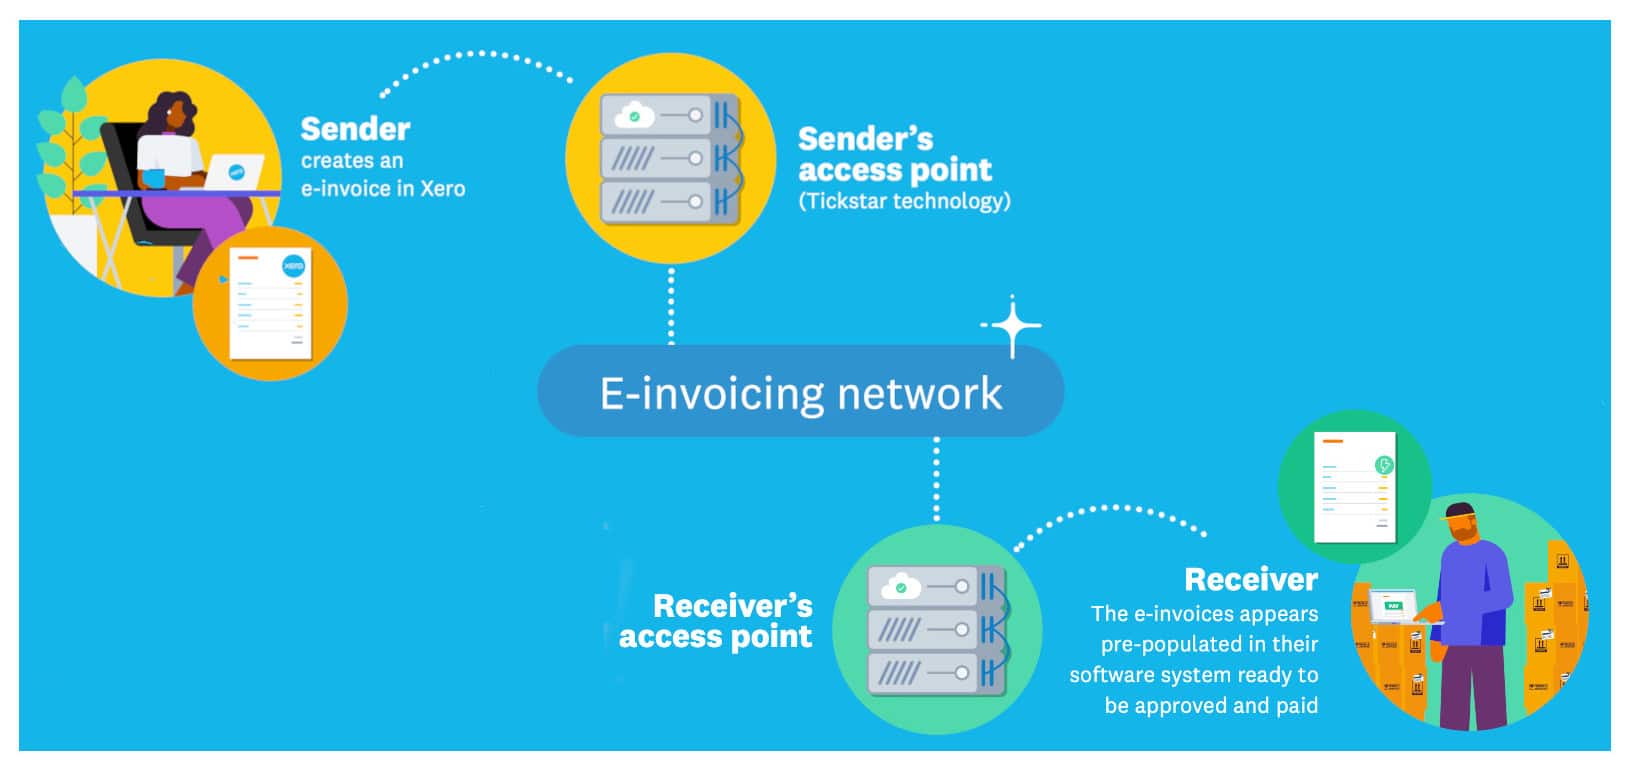 A diagram showing the e-invoicing network process. A full description follows this image.